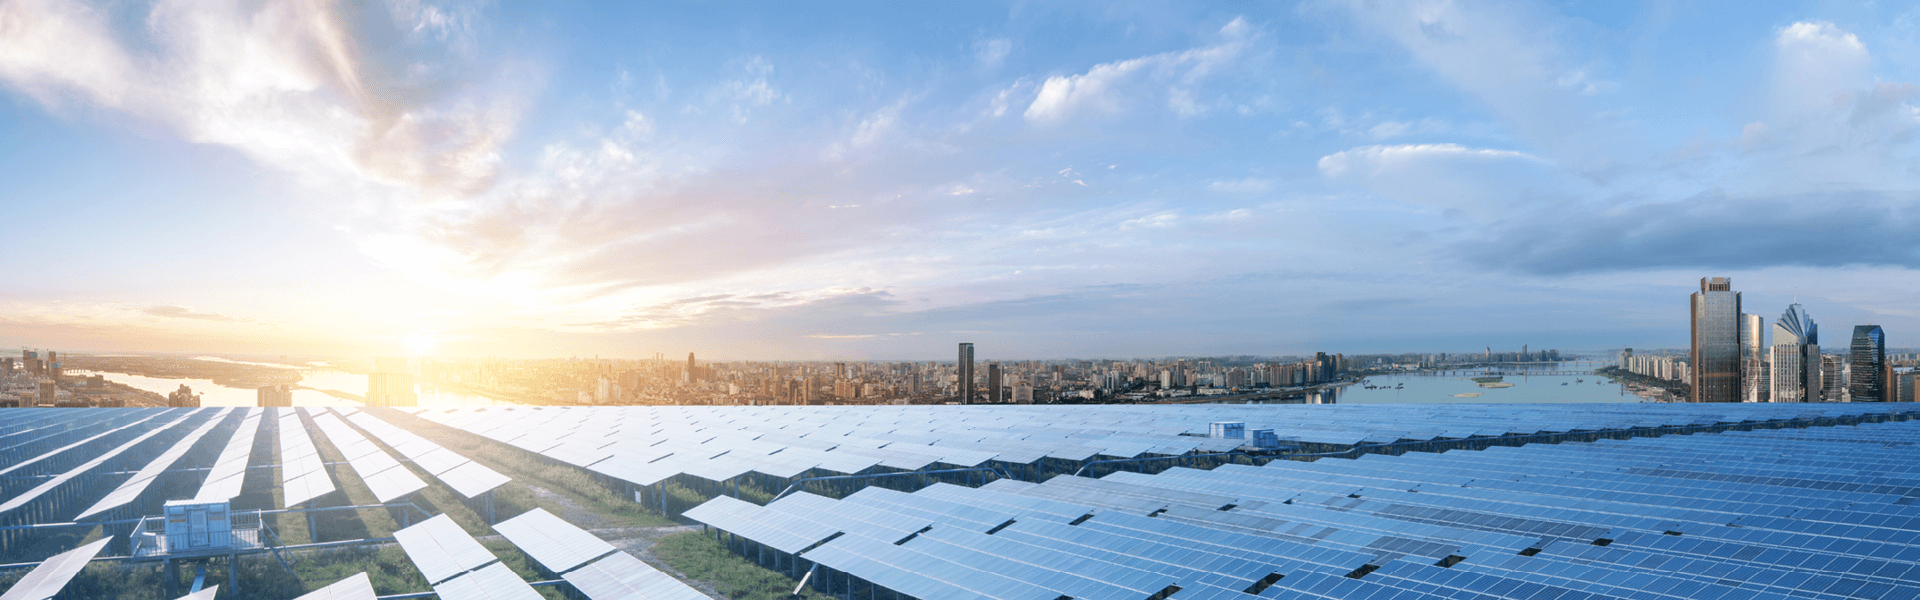 Solar Energy in Front of City Scape